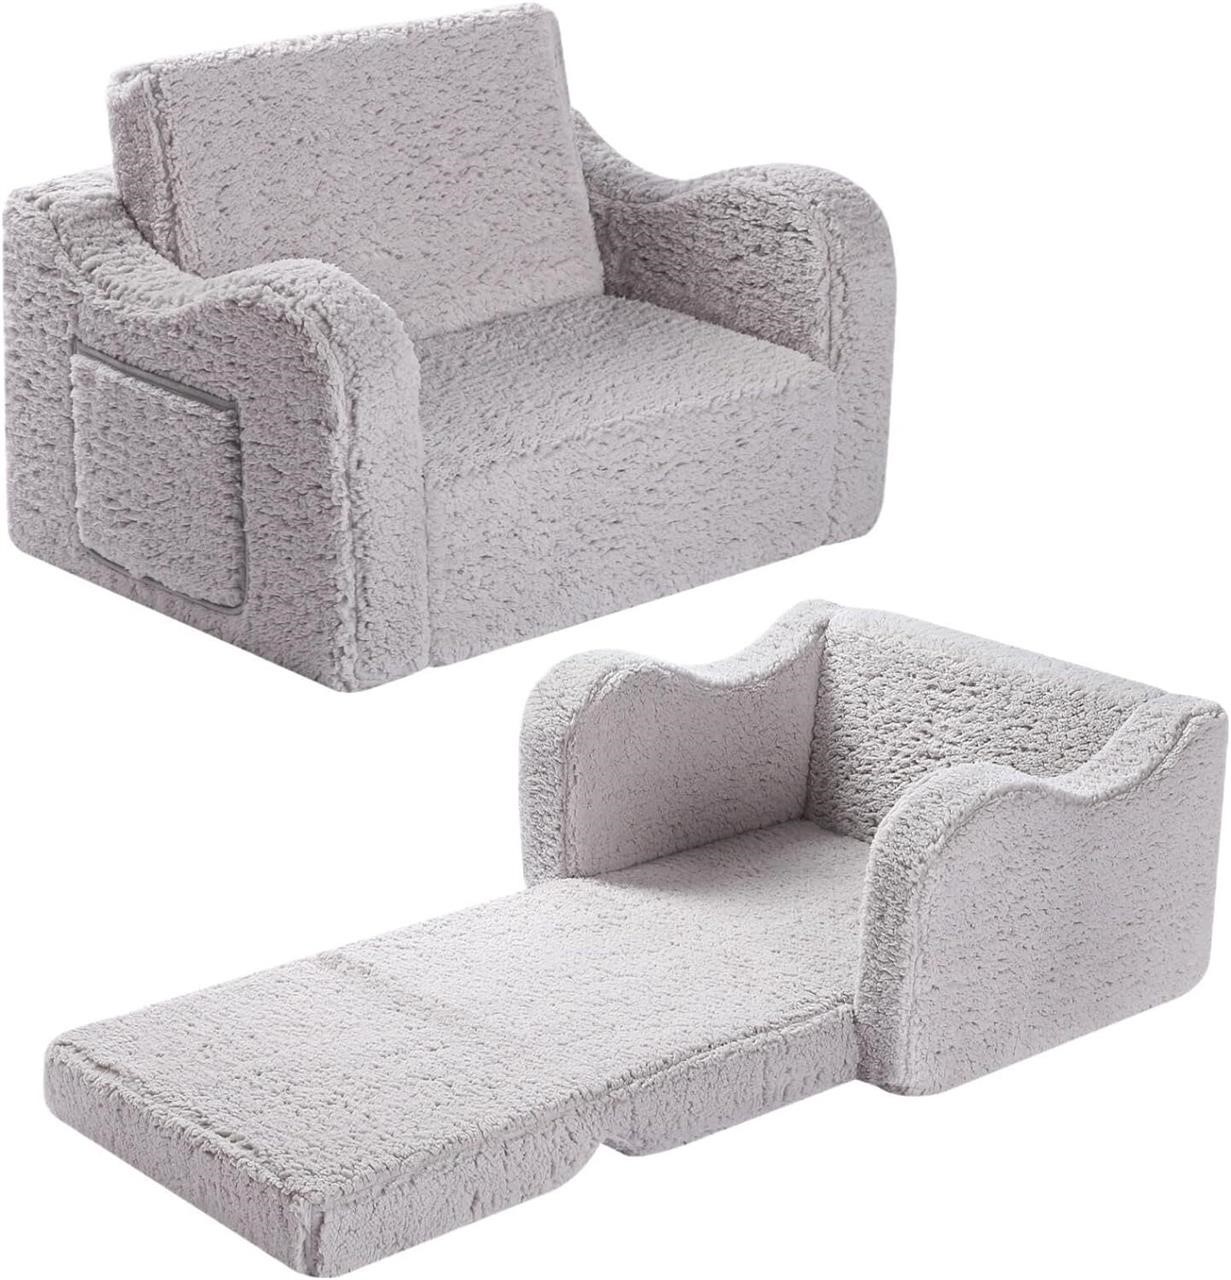 Kids Chairs  2-in-1 Toddler Soft Sherpa Couch